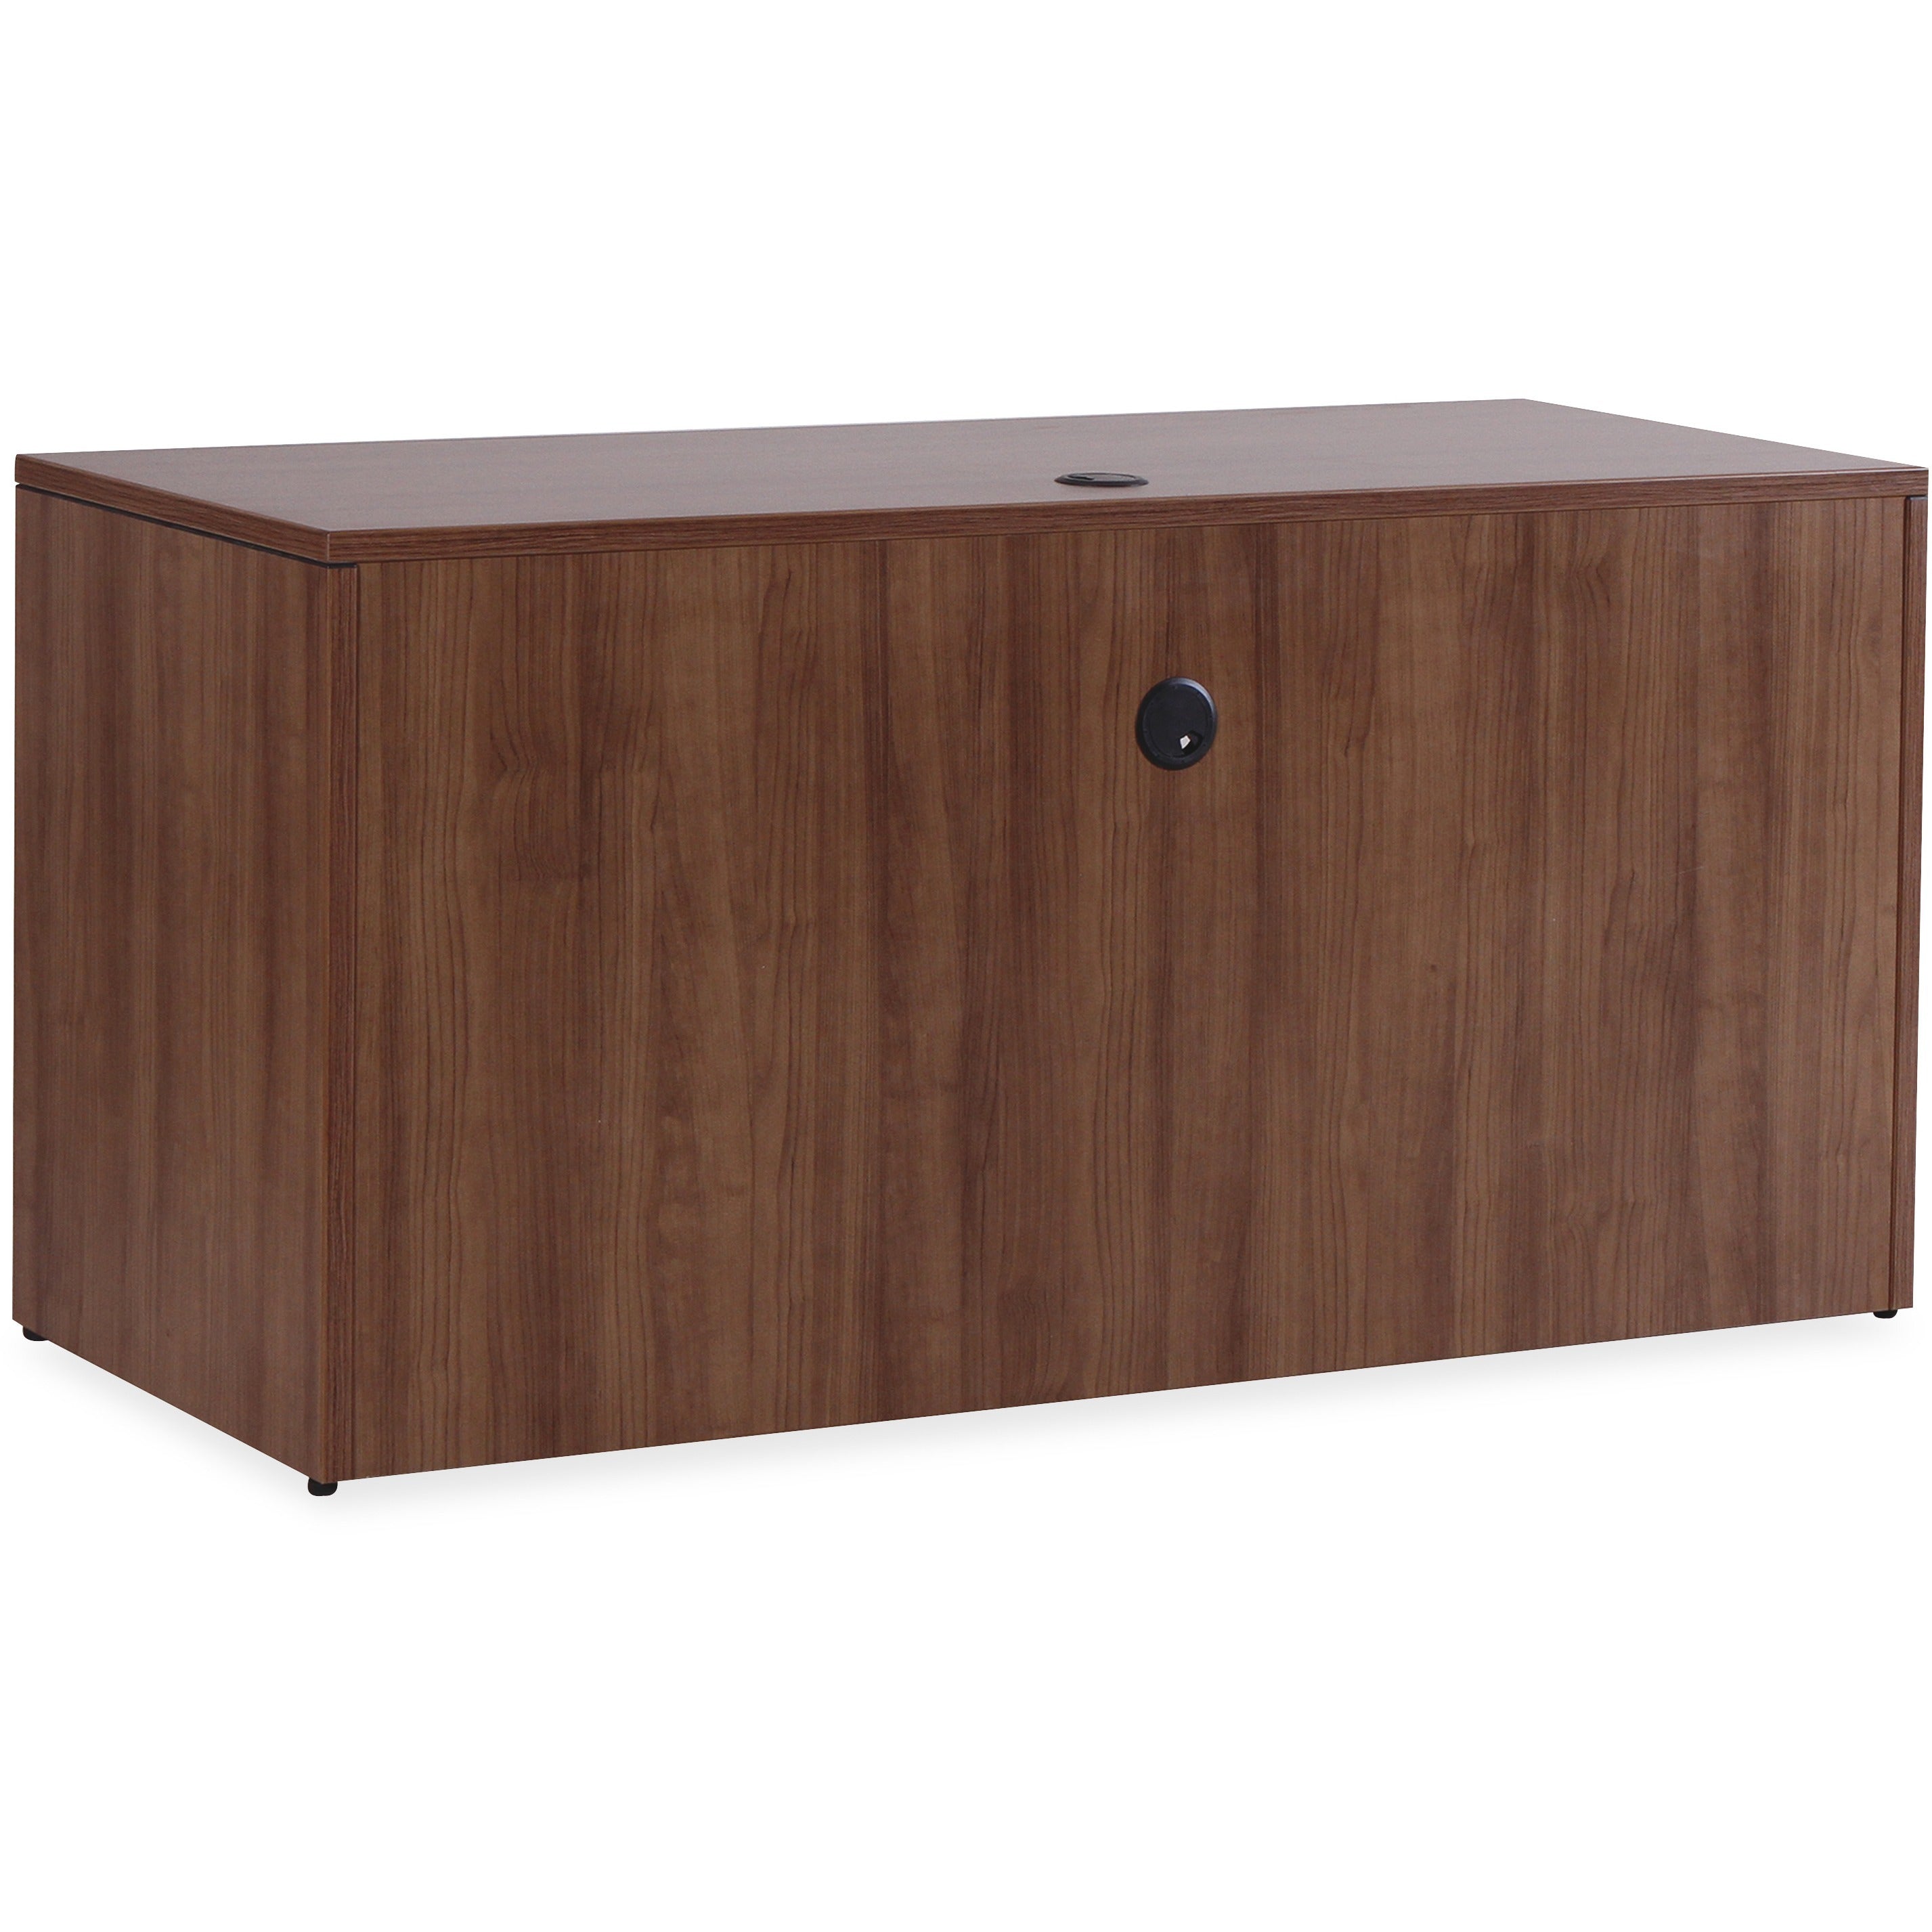 Lorell Essentials Series Credenza Shell - 59" x 23.6"29.5" Credenza, 1" Top, 3.8" Drawer Pull, 0.1" Edge - Finish: Walnut - Laminate Table Top - Durable, Grommet, Cord Management, Adjustable Feet - For Office - 